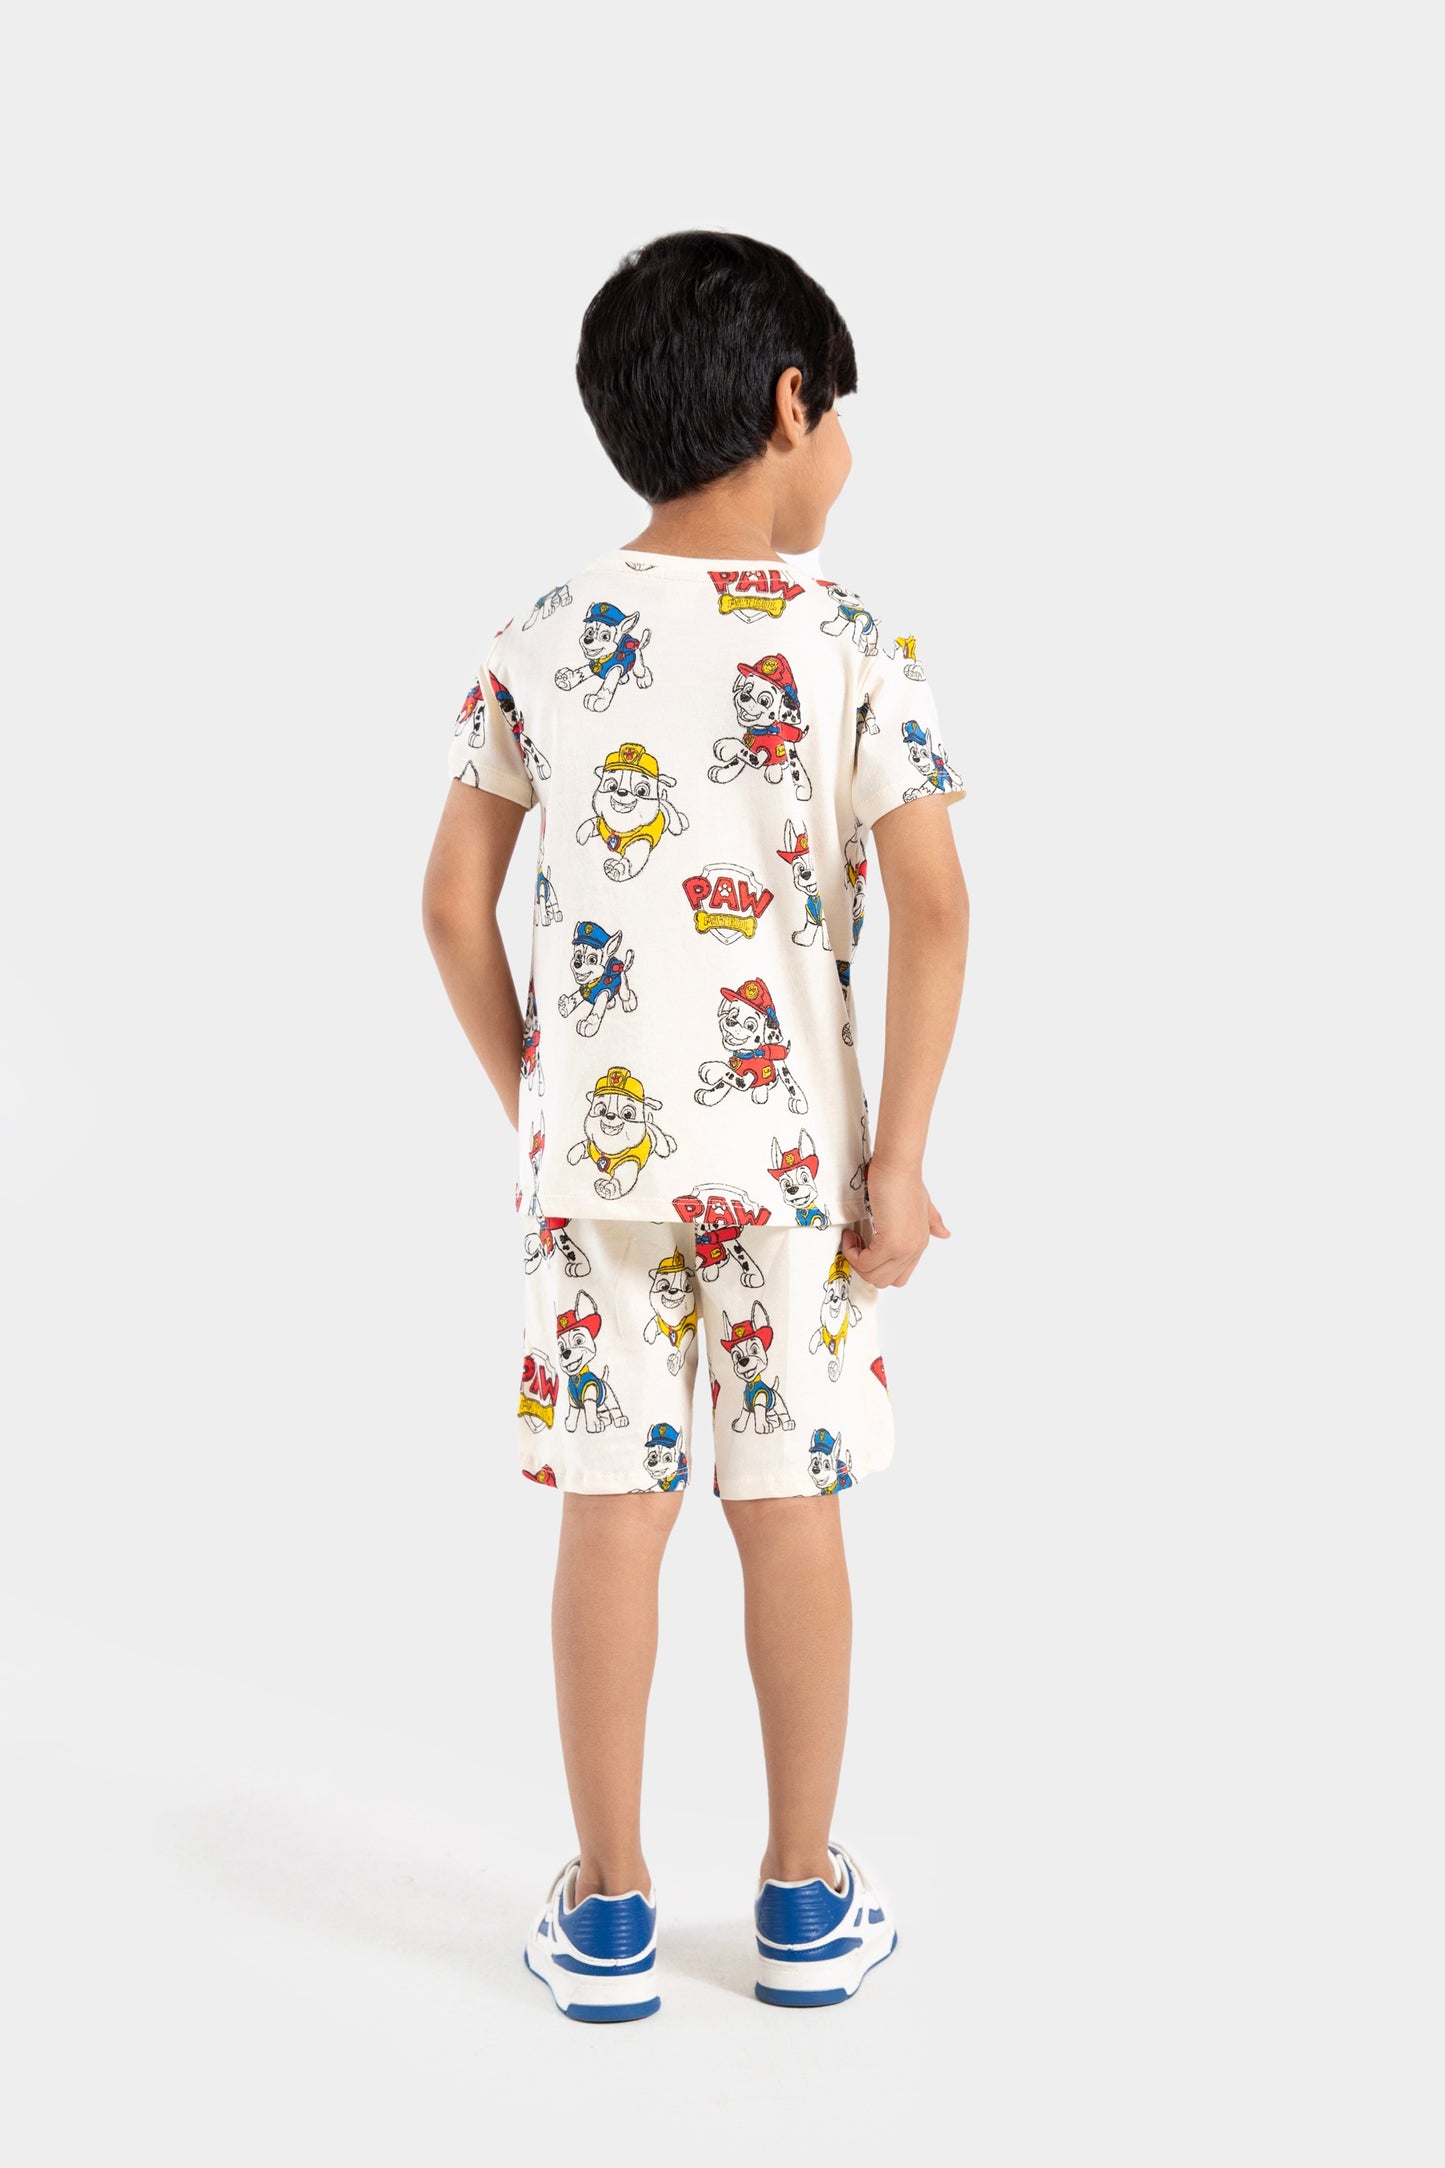 All-Over Character Print Suit